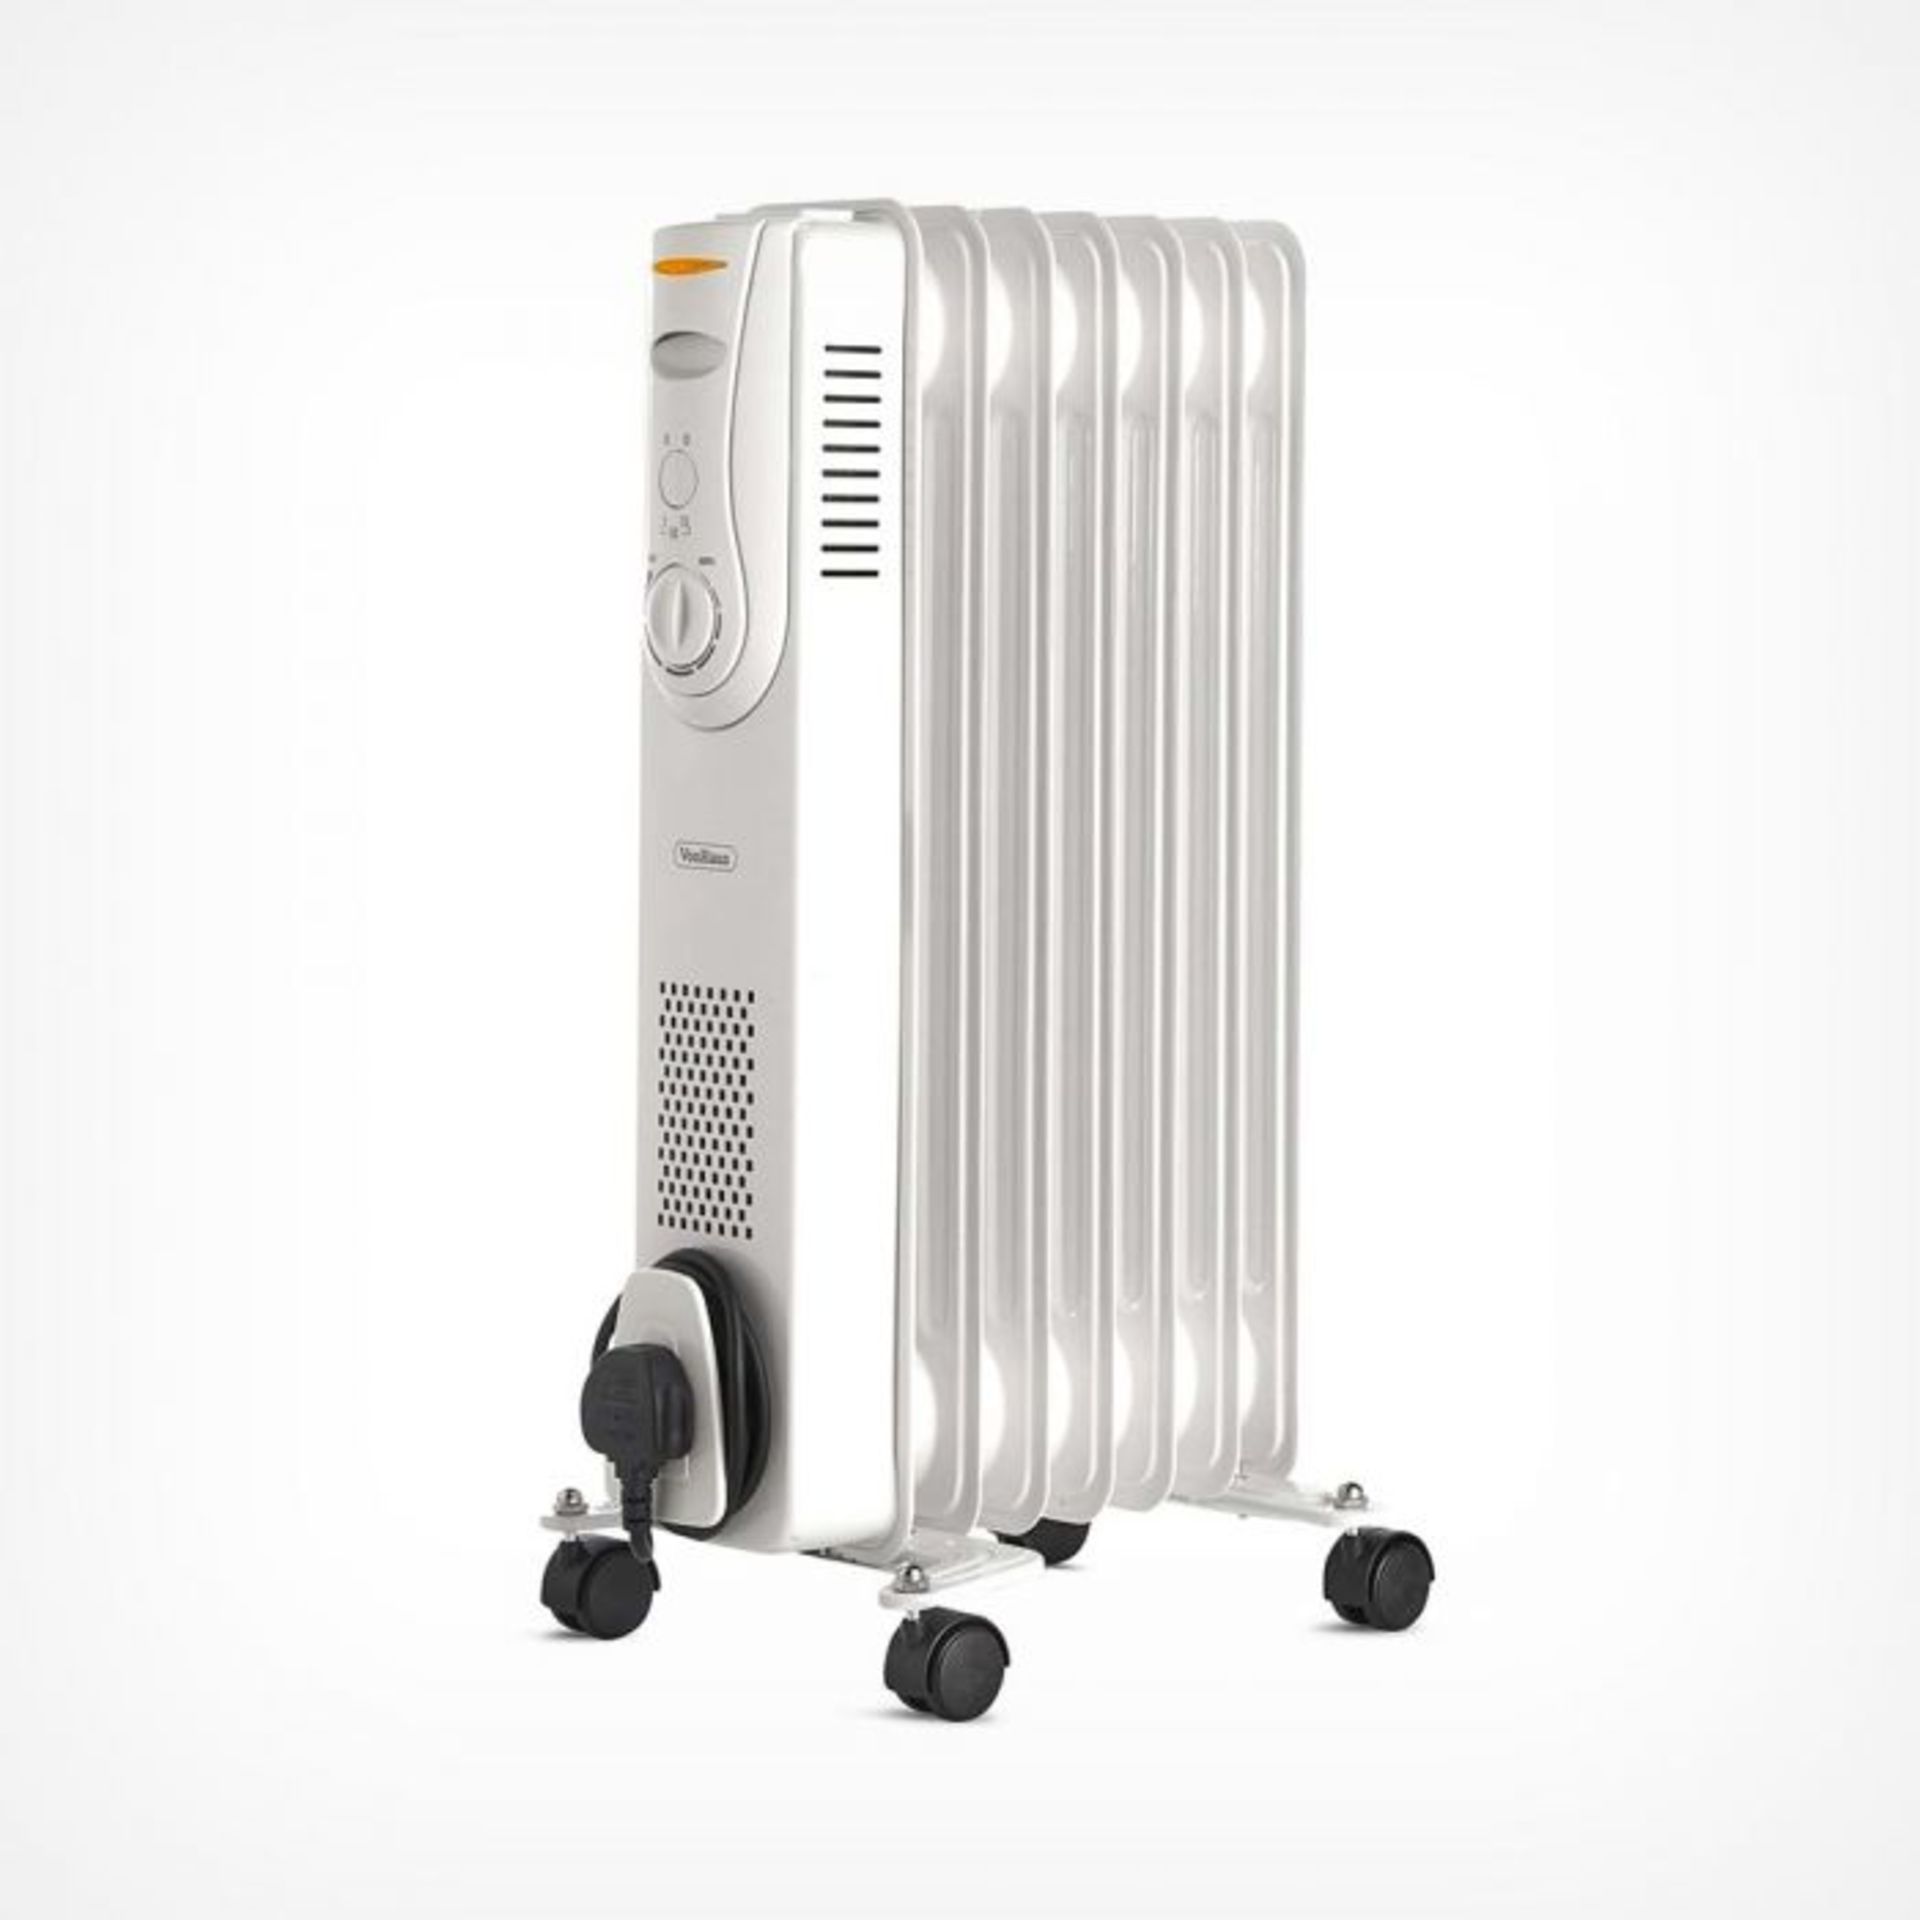 (NN77) 7 Fin 1500W Oil Filled Radiator - White Powerful 1500W radiator with 7 oil-filled fins ... - Image 2 of 3